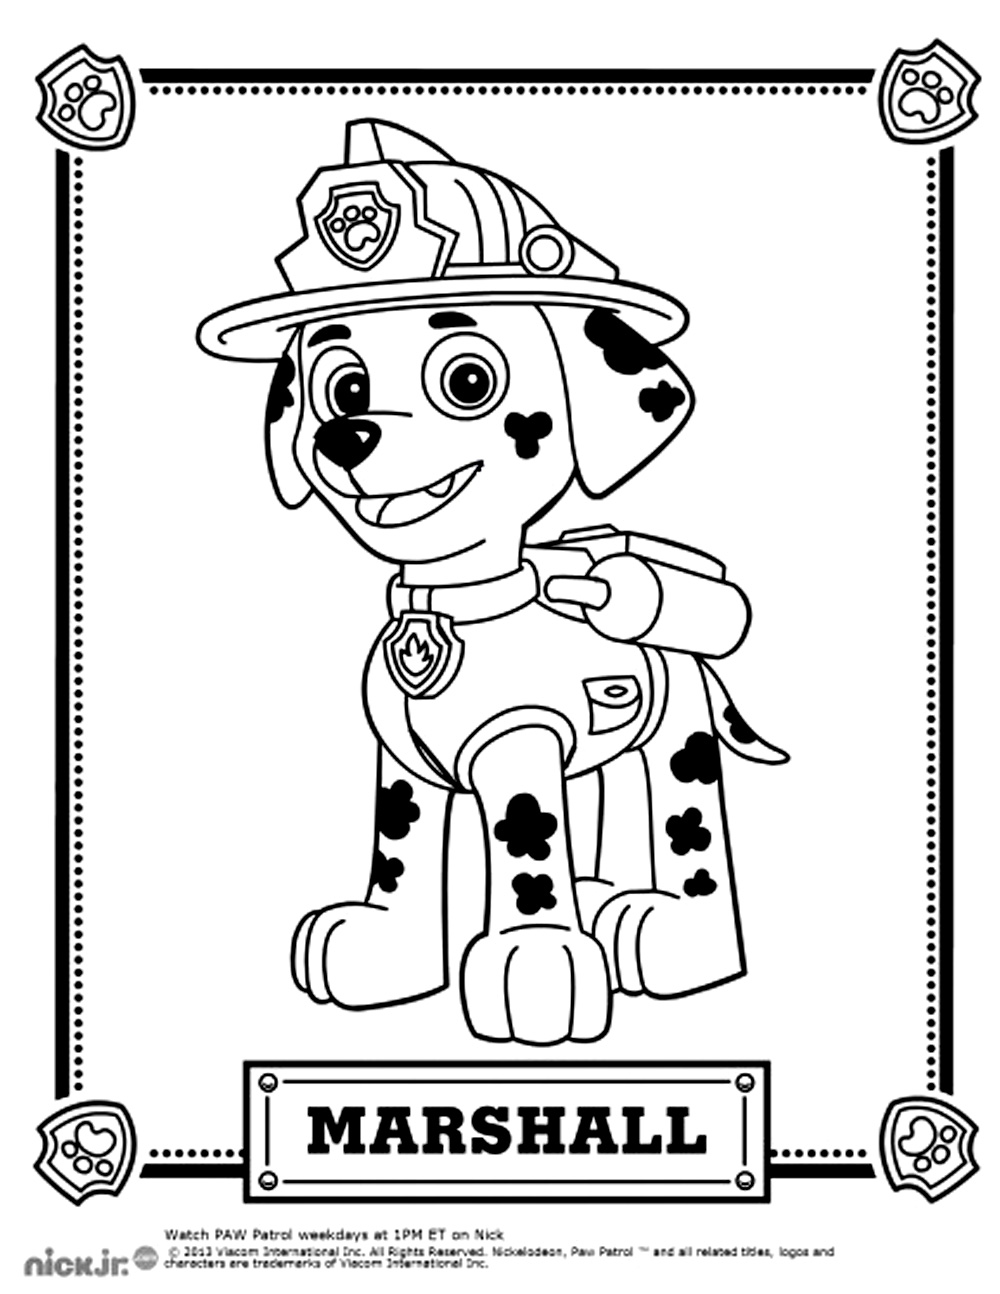 PAW Patrol Coloring Pages For Kids Free Printables Kids Art Craft